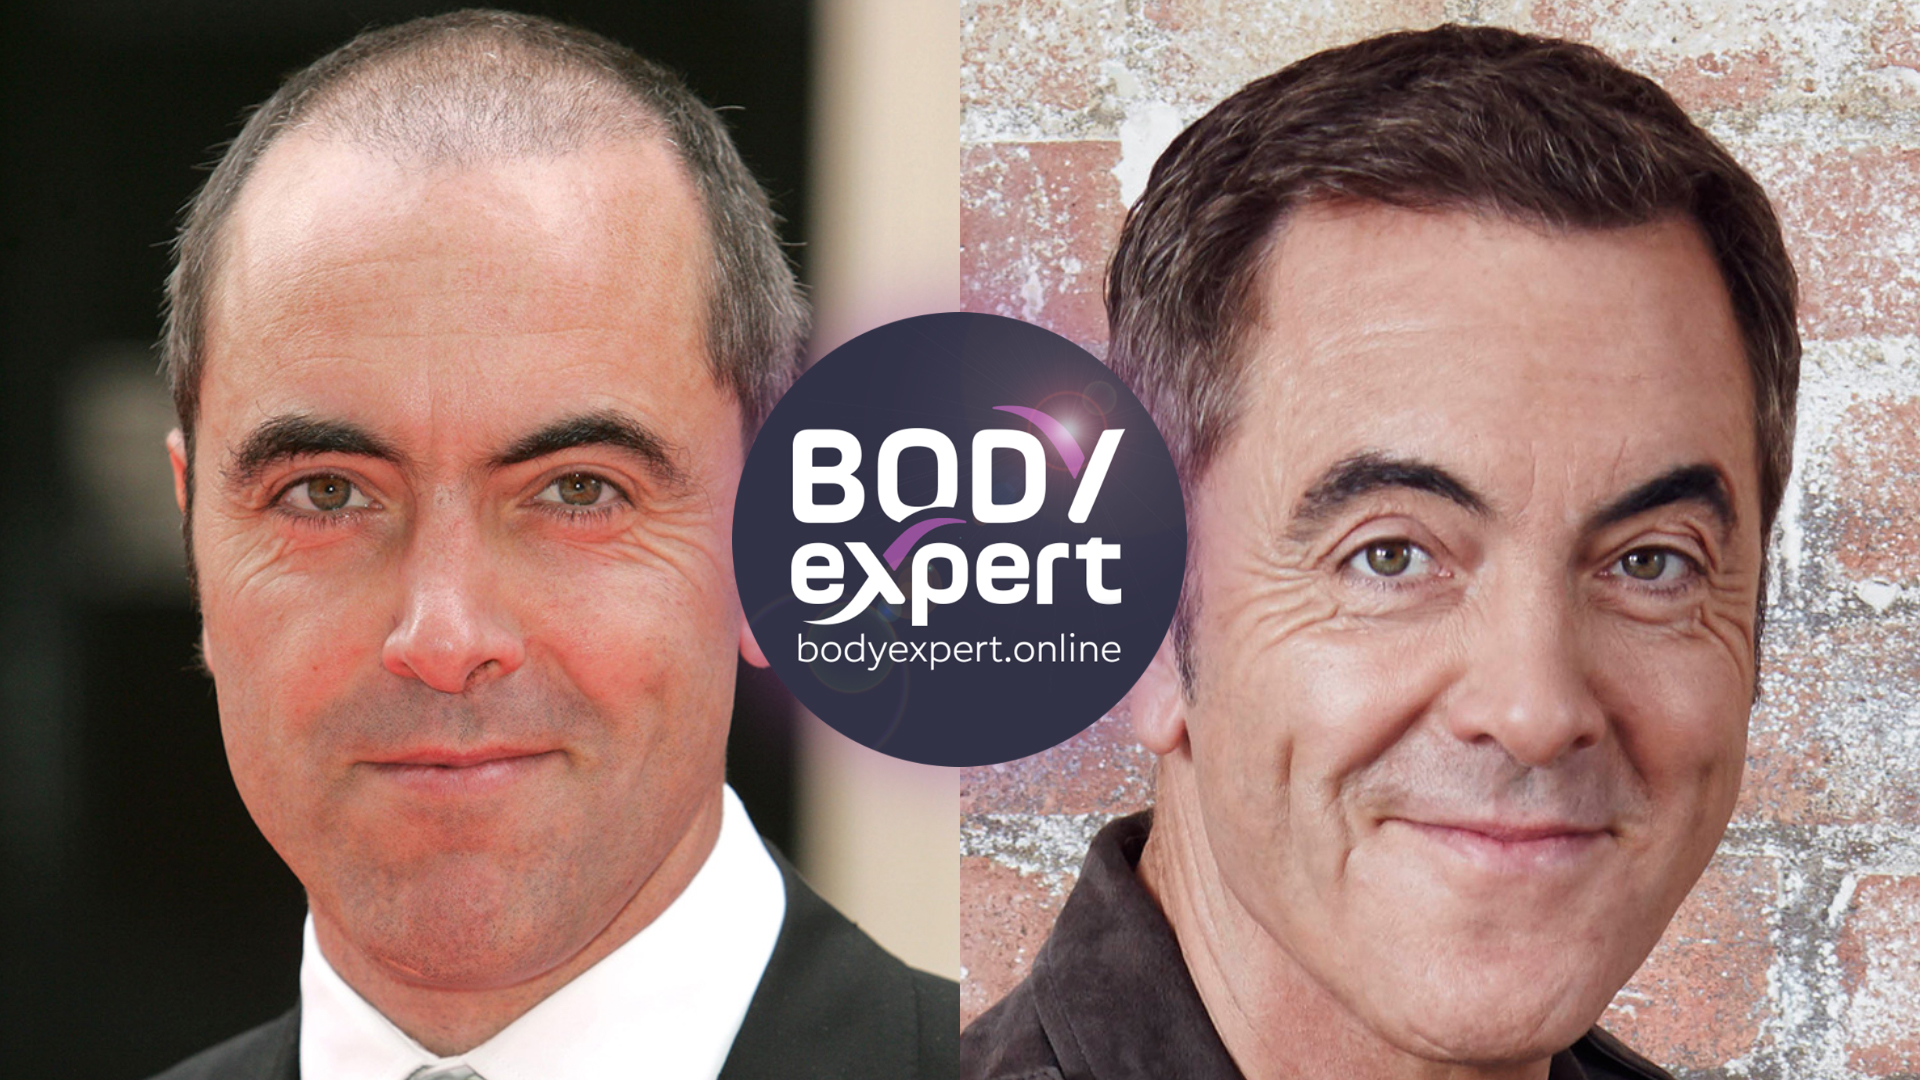 Top 100 image before and after hair transplant celebrity -  